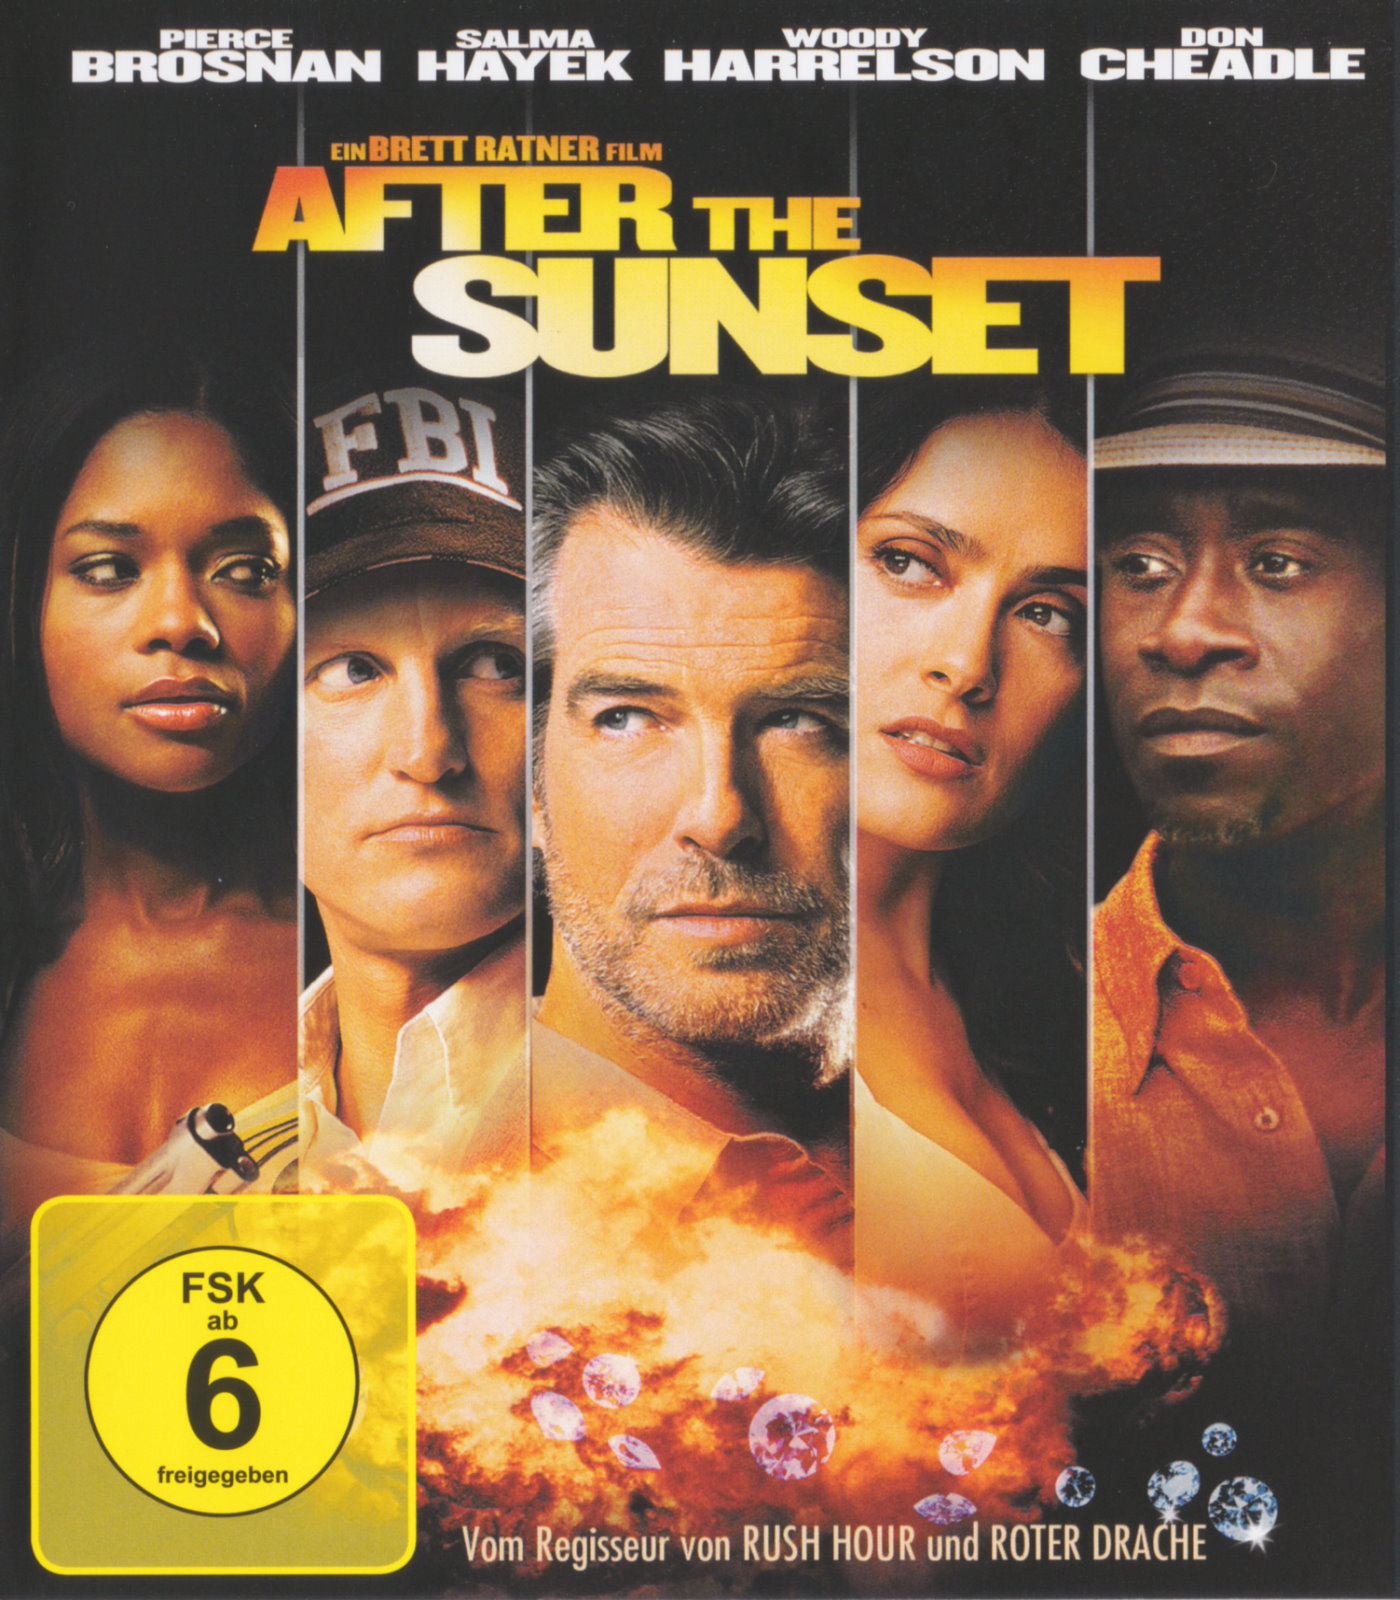 Cover - After the Sunset.jpg